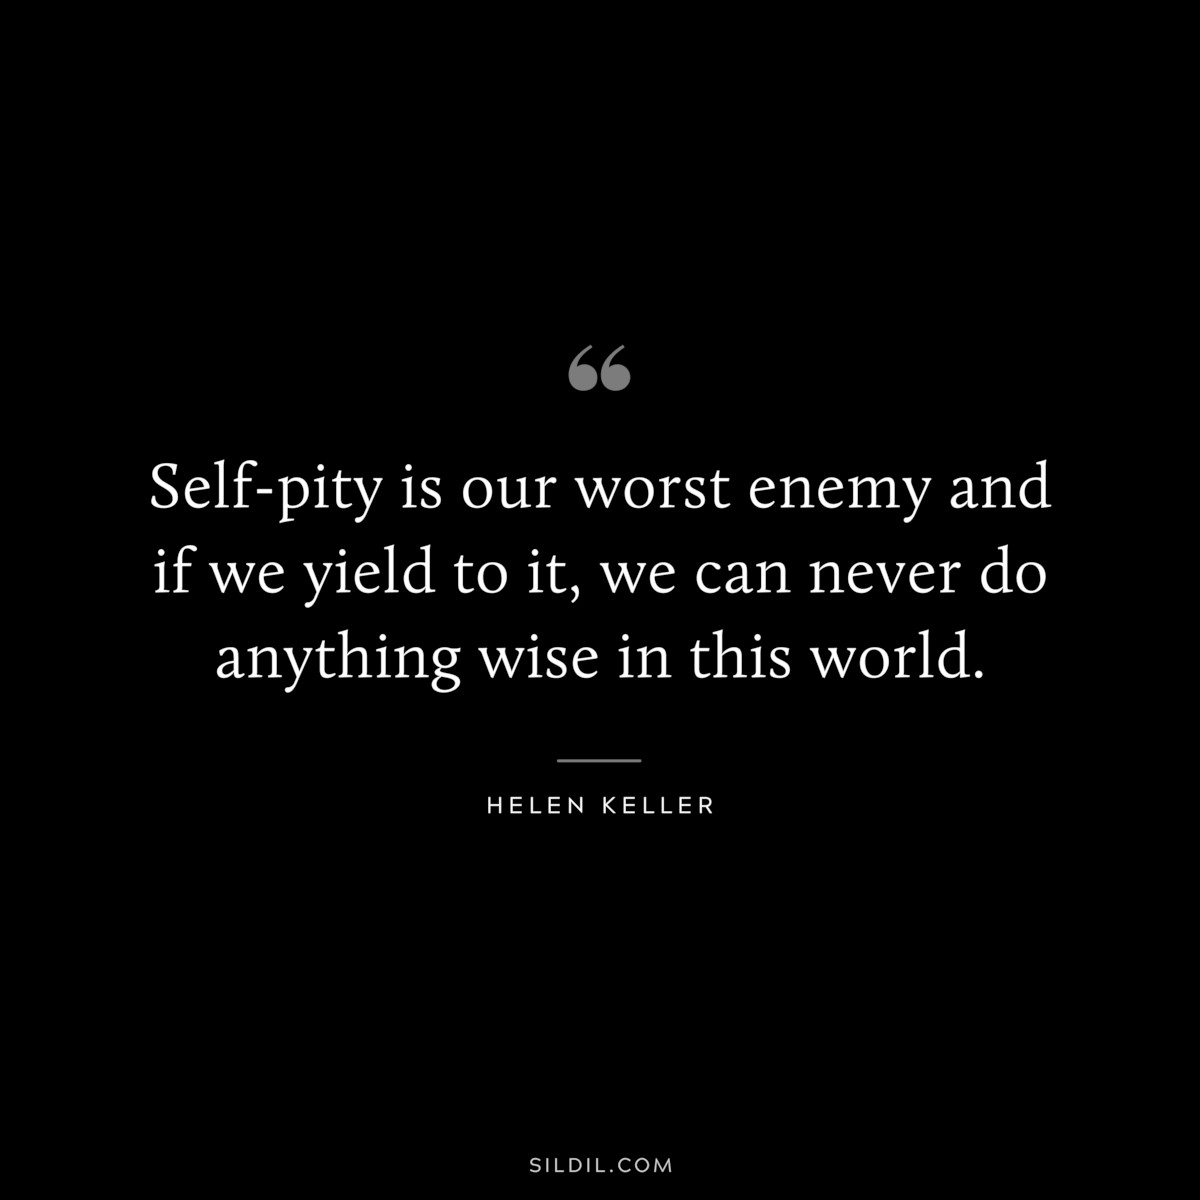 Self-pity is our worst enemy and if we yield to it, we can never do anything wise in this world. ― Helen Keller